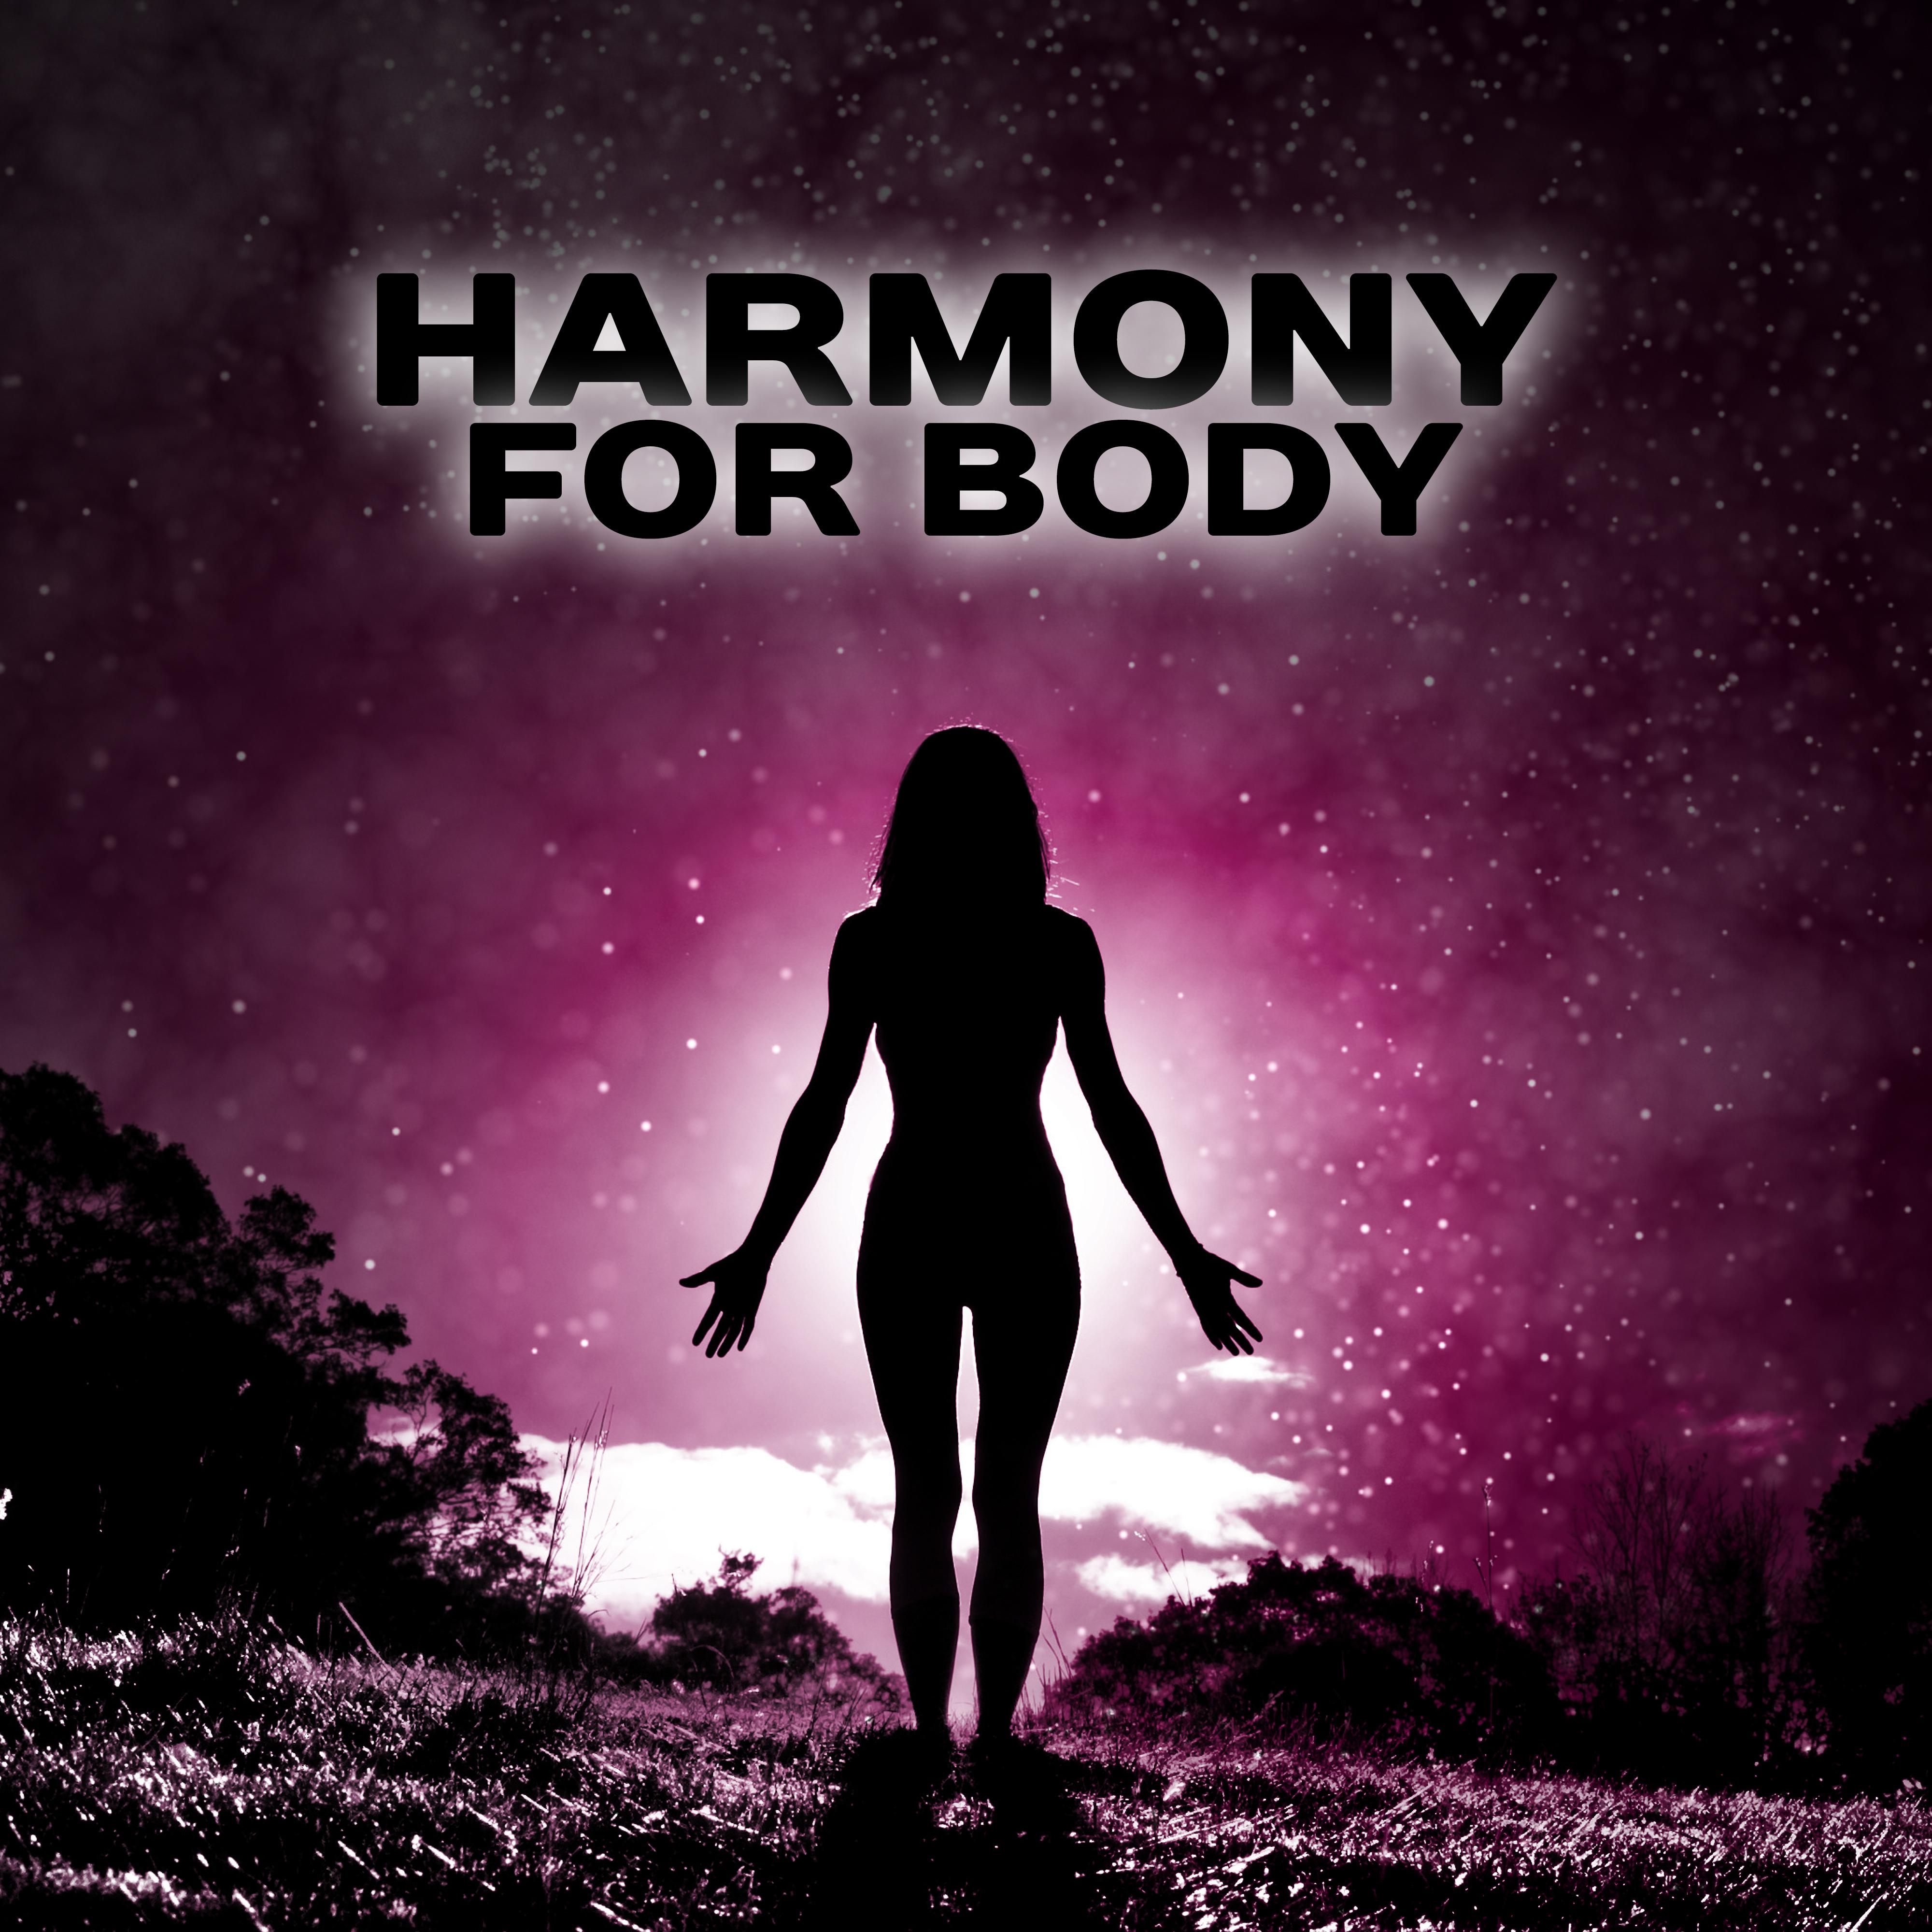 Harmony for Body – Spa Music, Soft Sounds for Wellness, Massage, Zen Music, Stress Relief, Pure Mind, Healing Body, Soothing Nature Sounds